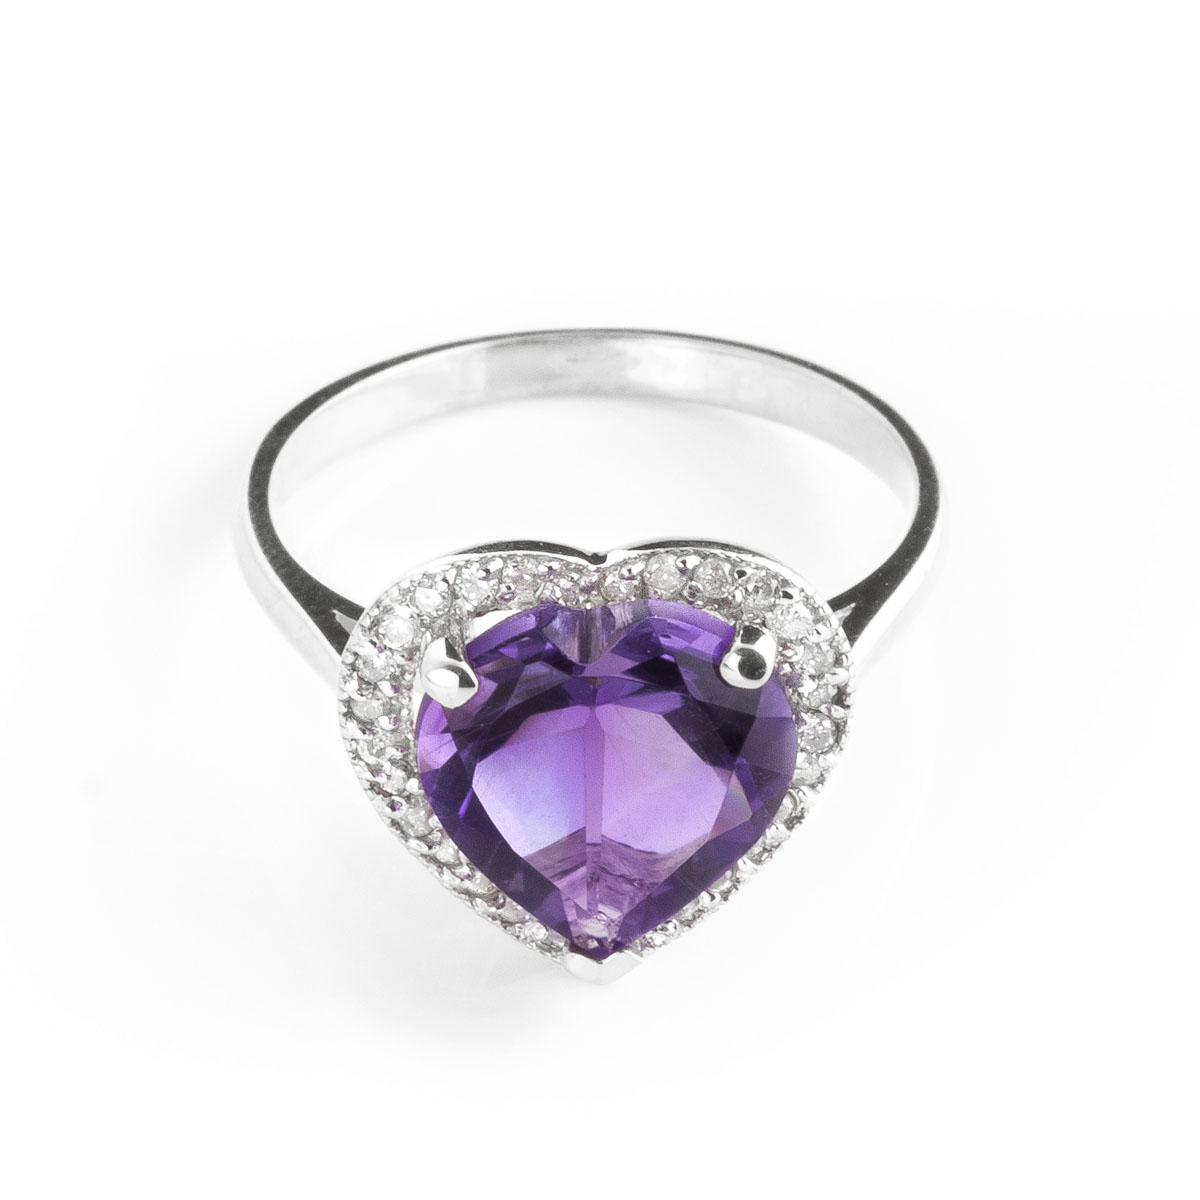 Amethyst Halo Ring 3.24 ctw in 9ct White Gold